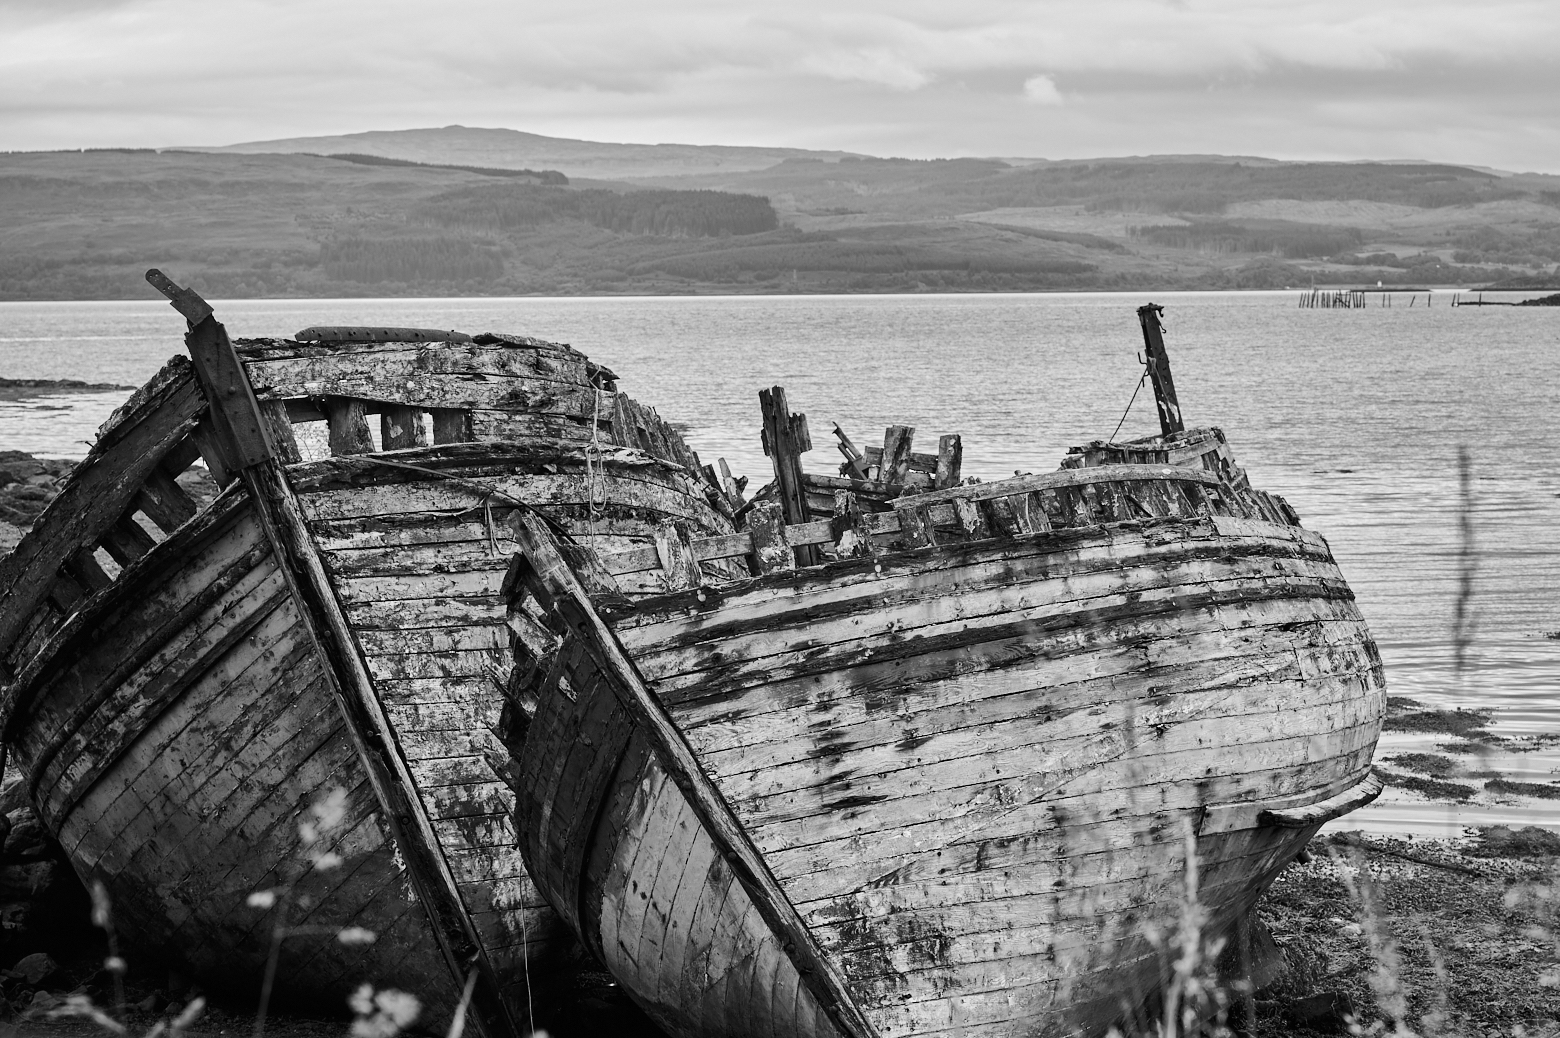 Visiting the three wrecks of fishing boats in Salen, Isle of Mull.